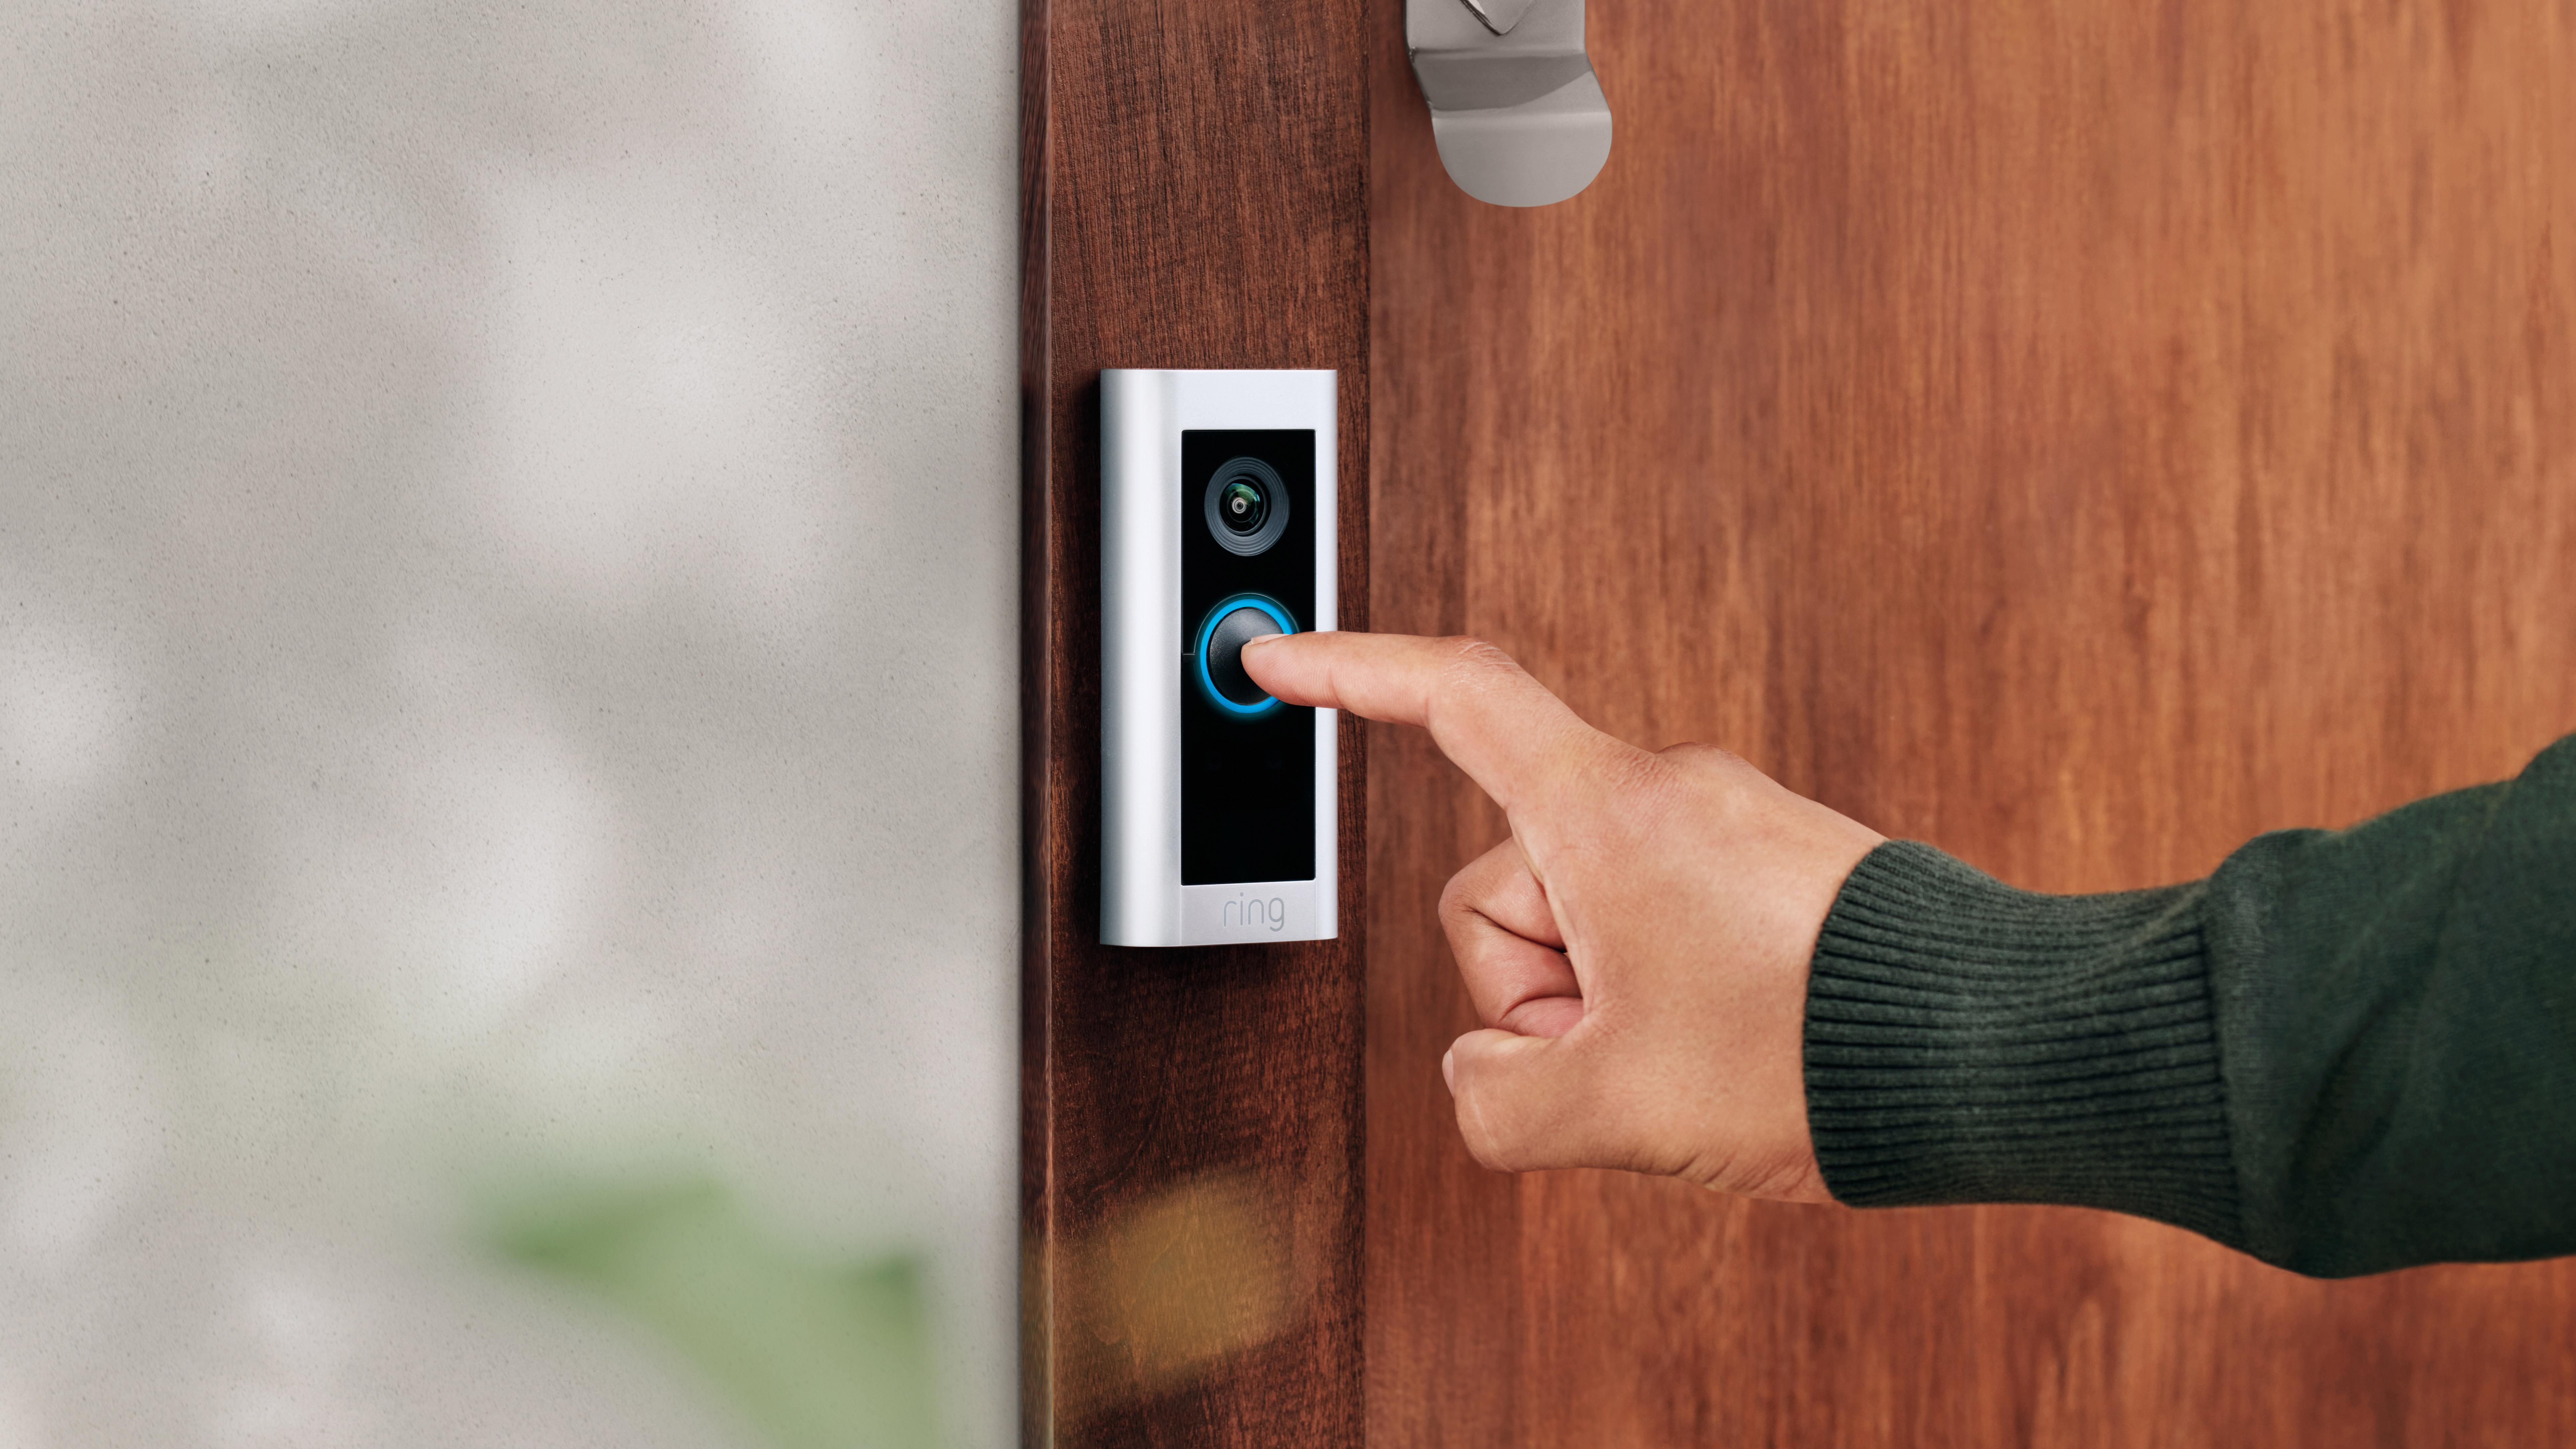 Ring Video Doorbell Pro 2 (2021 release) and Ring Stick up